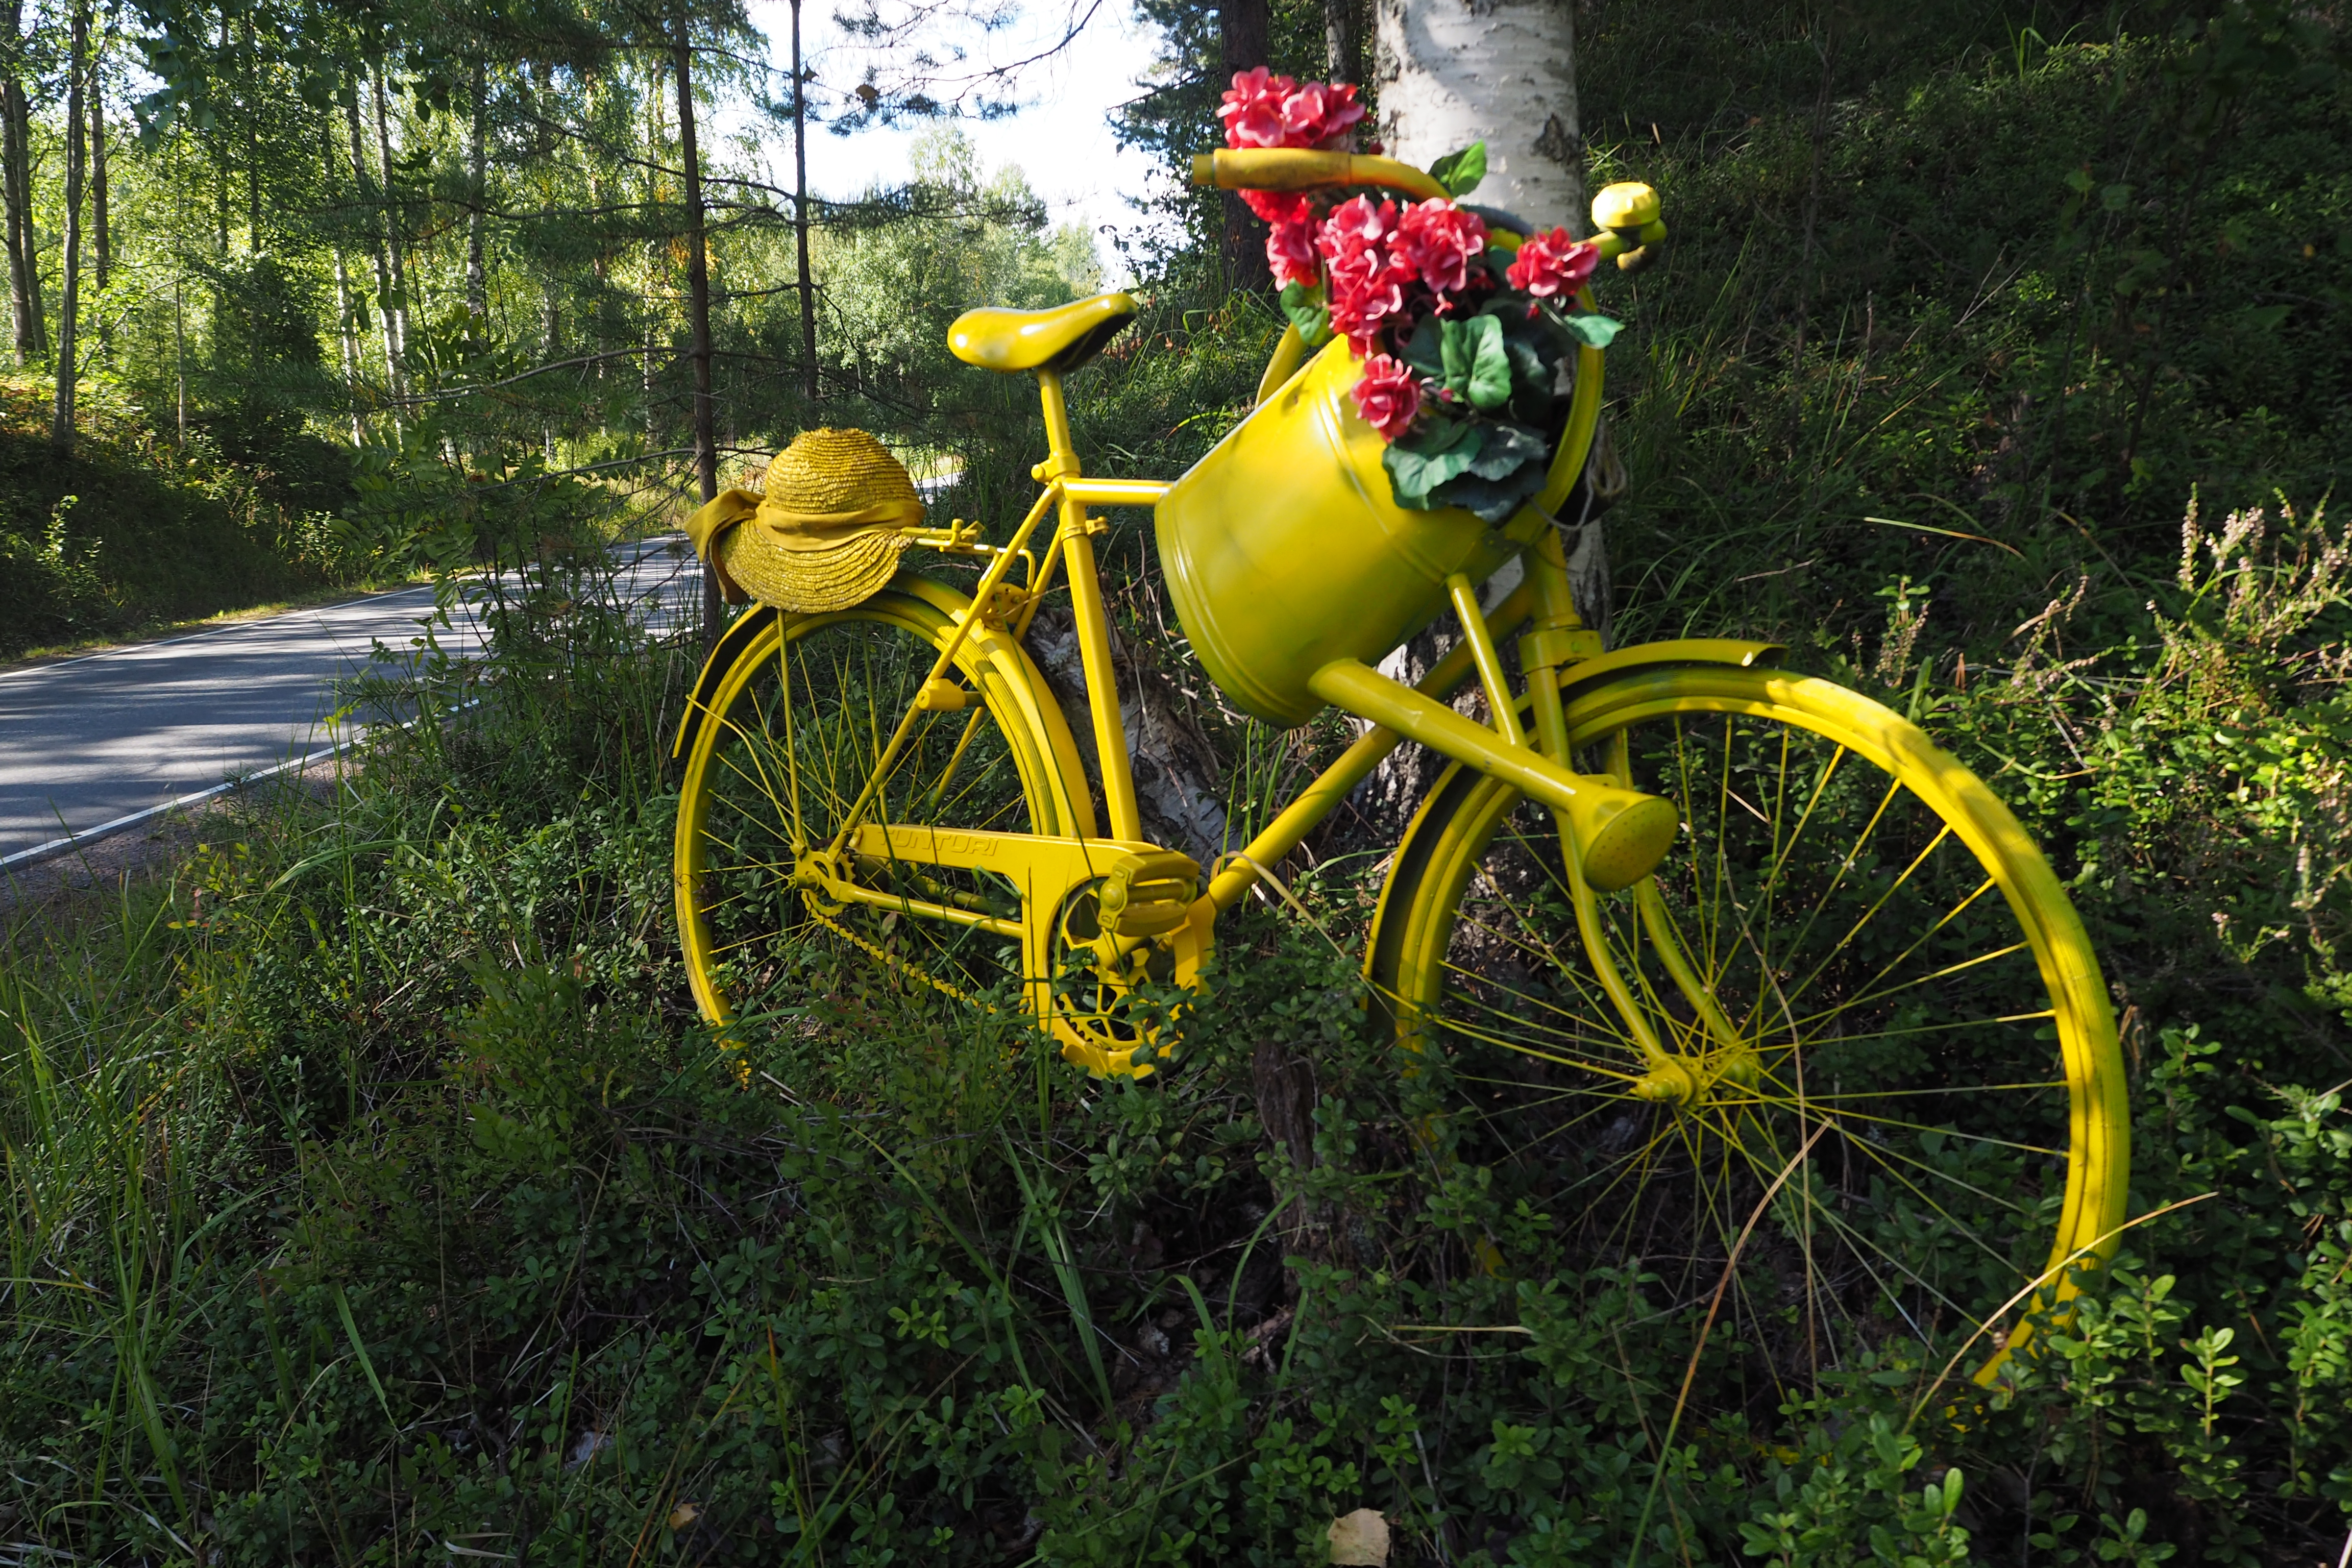 A yellow bike with flowers on a basket